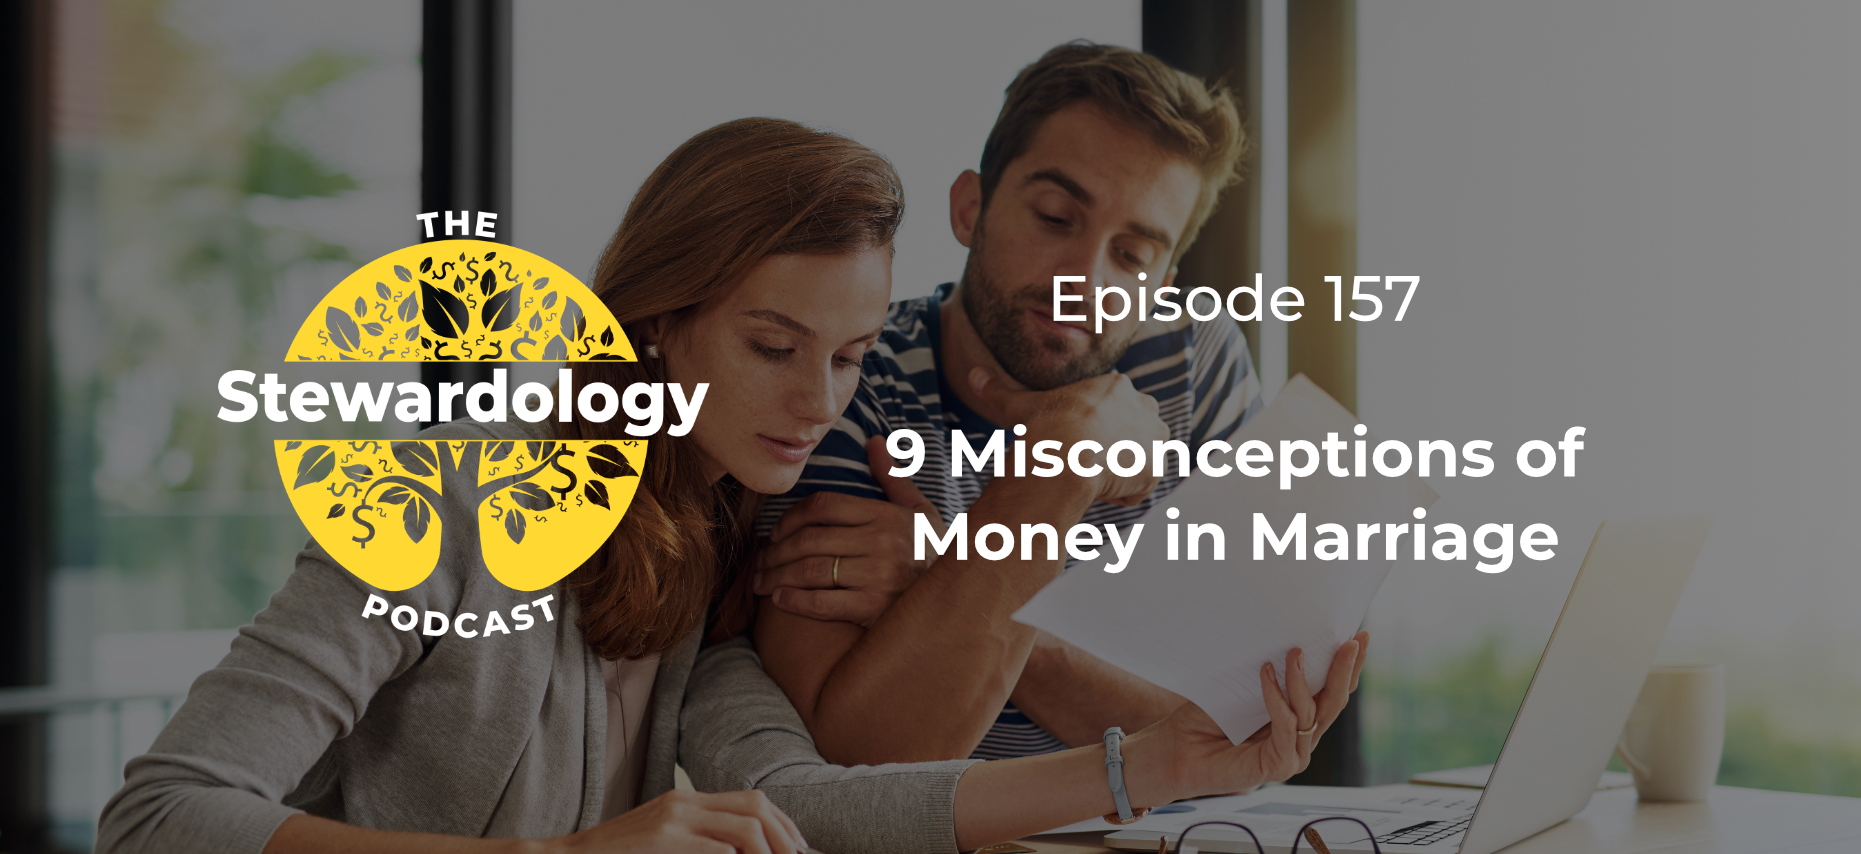 Misconceptions of Money